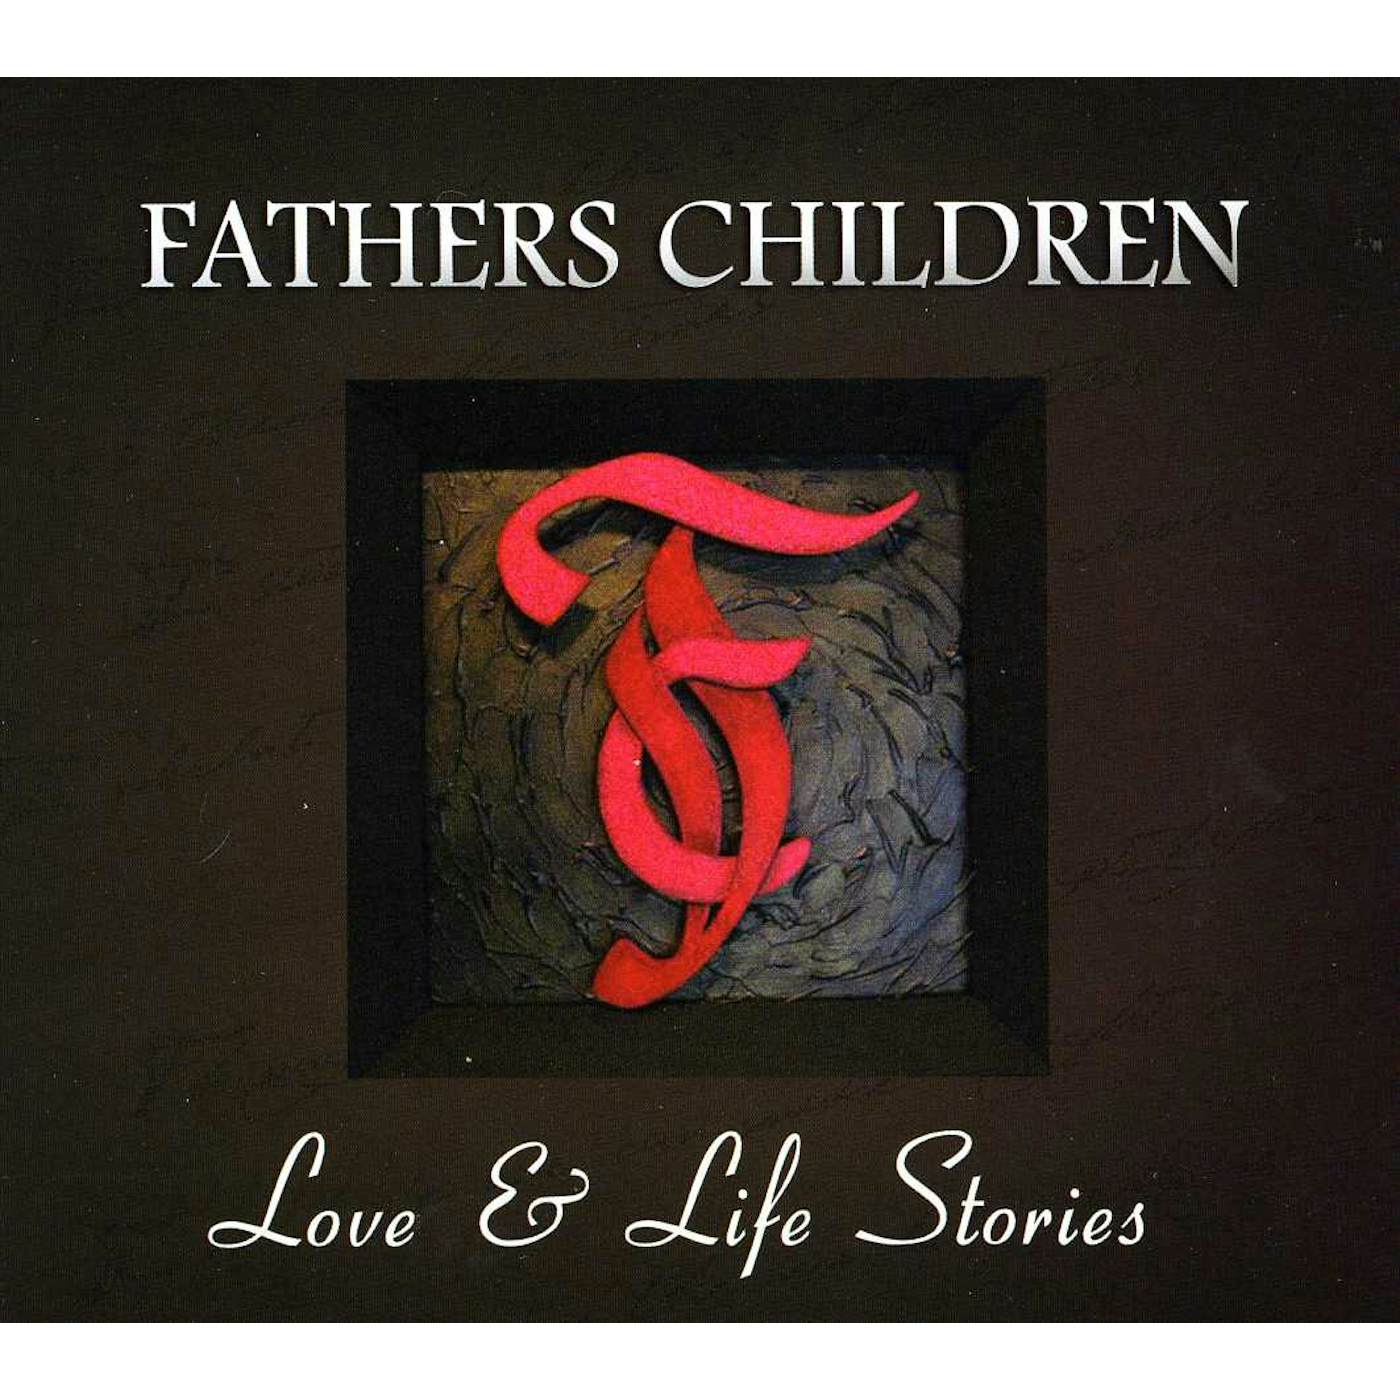 Father's Children LOVE & LIFE STORIES CD